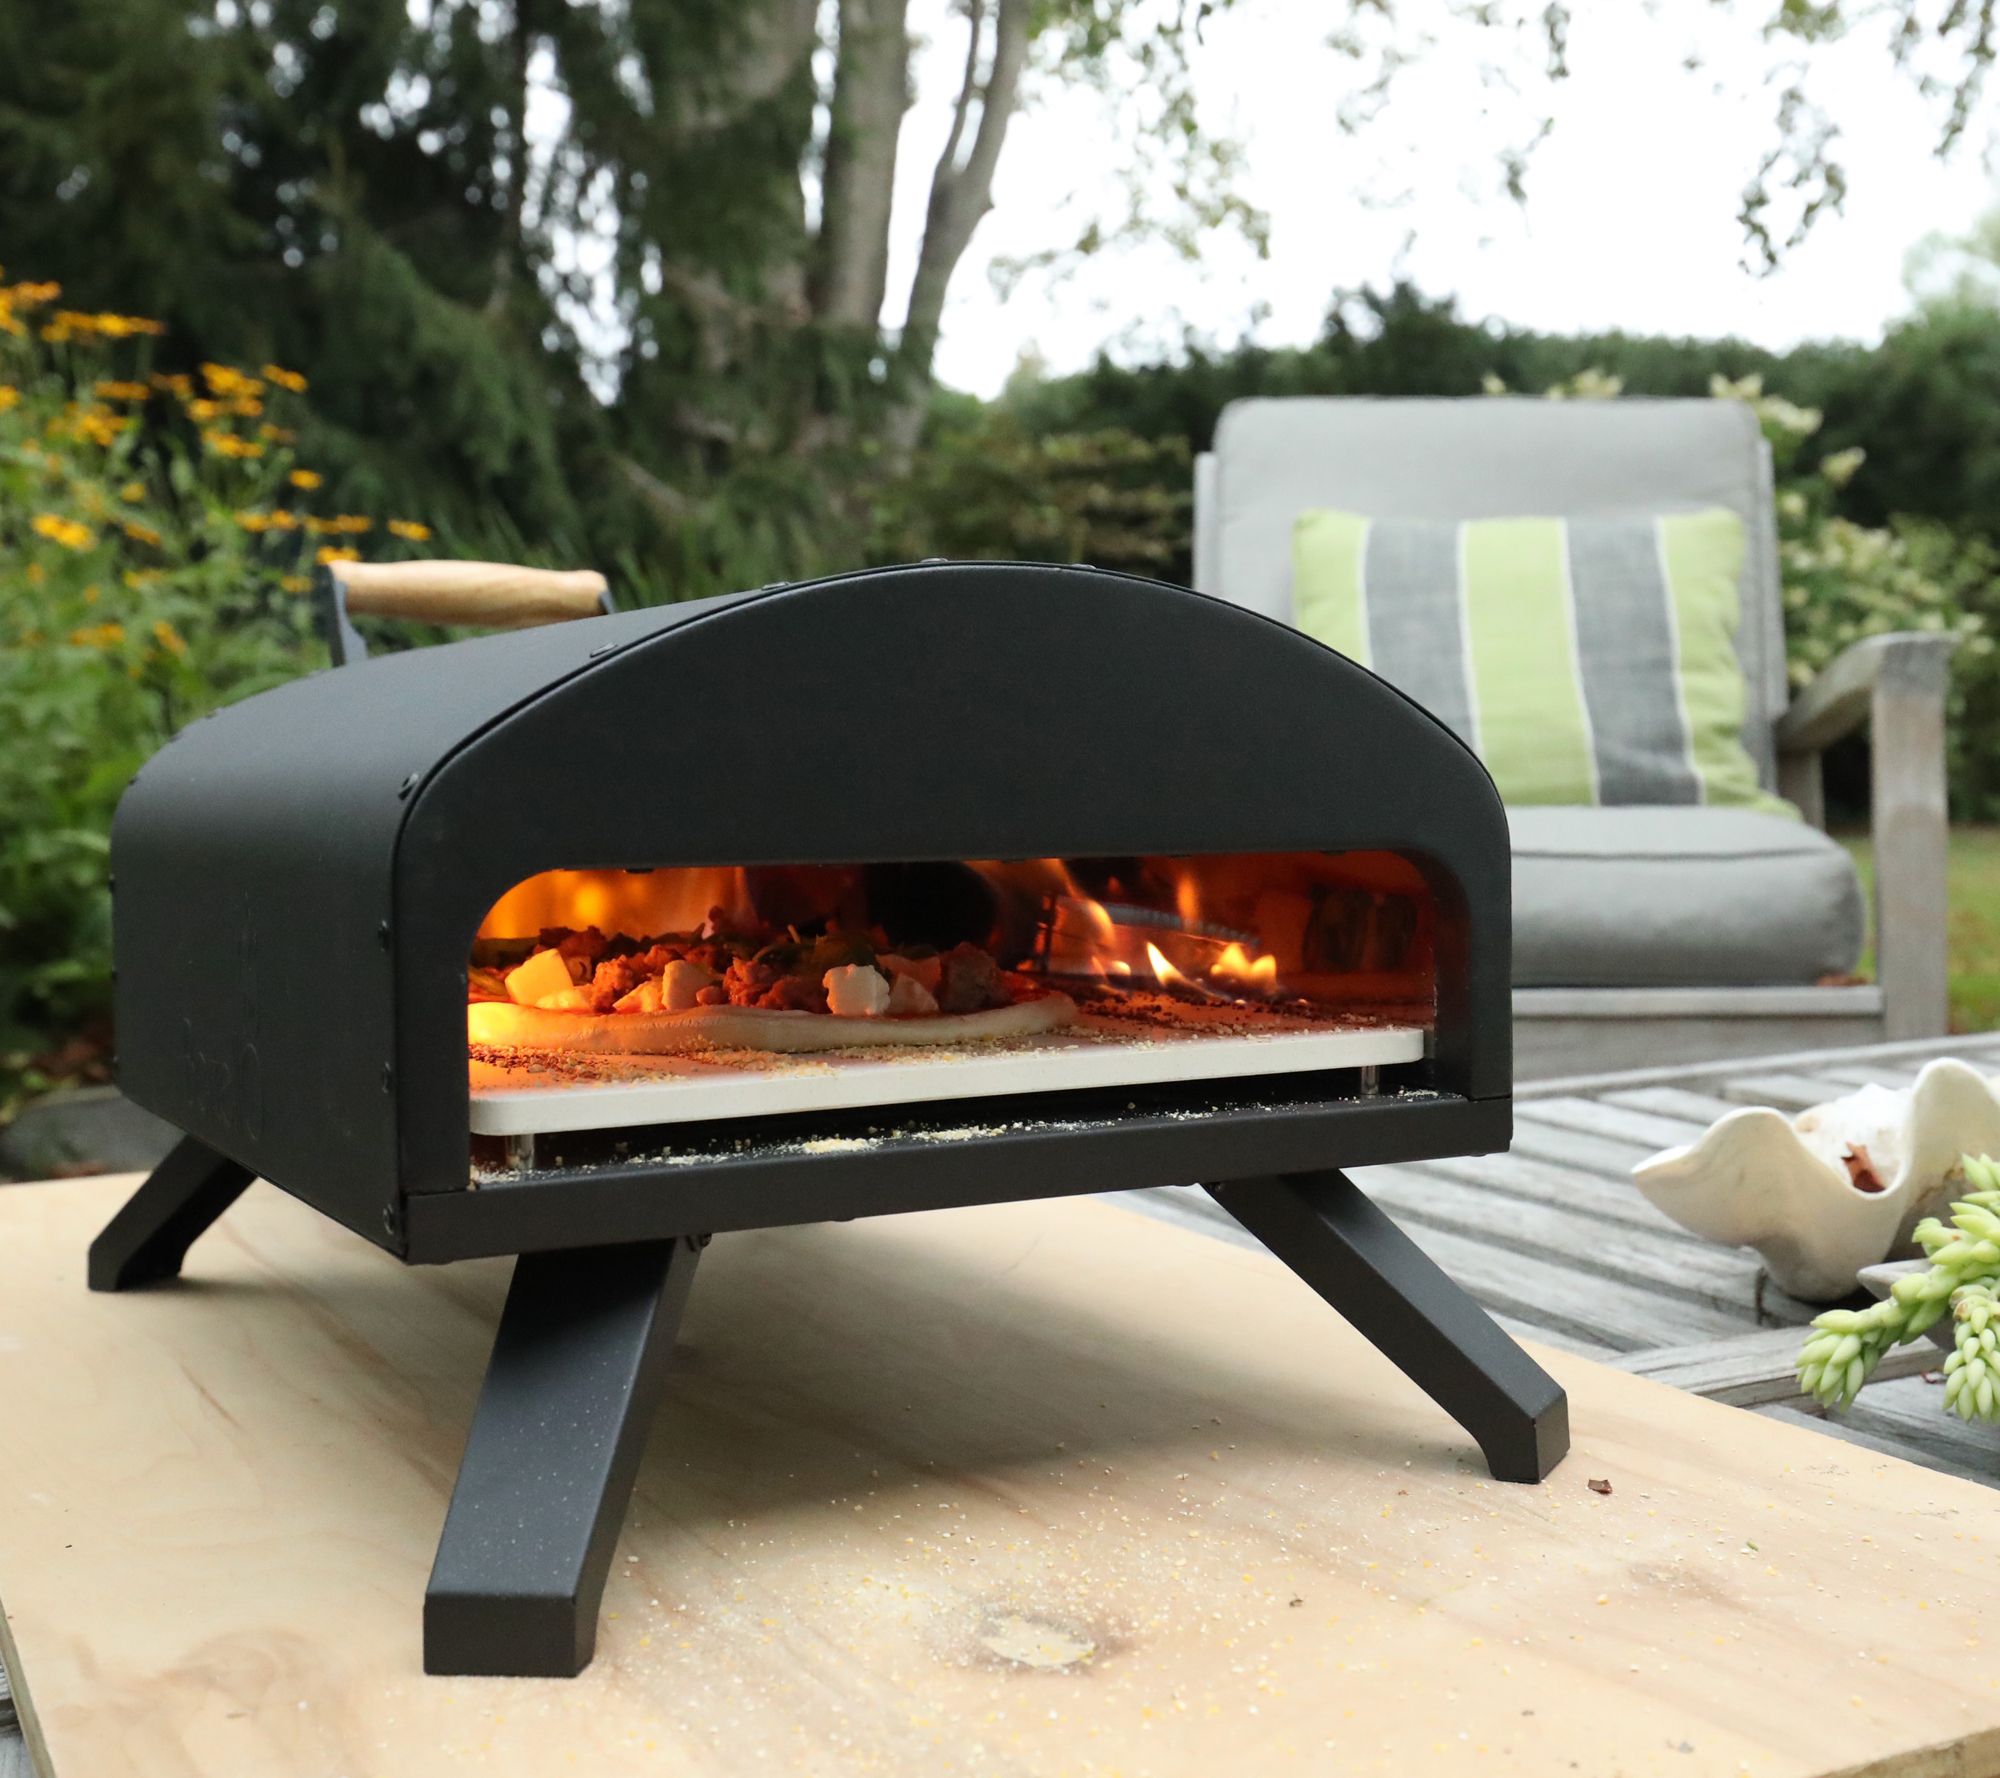 Bertello Gas, Charcoal & Wood Fired Outdoor Pizza Oven with Accessories. $270 including free shipping from QVC